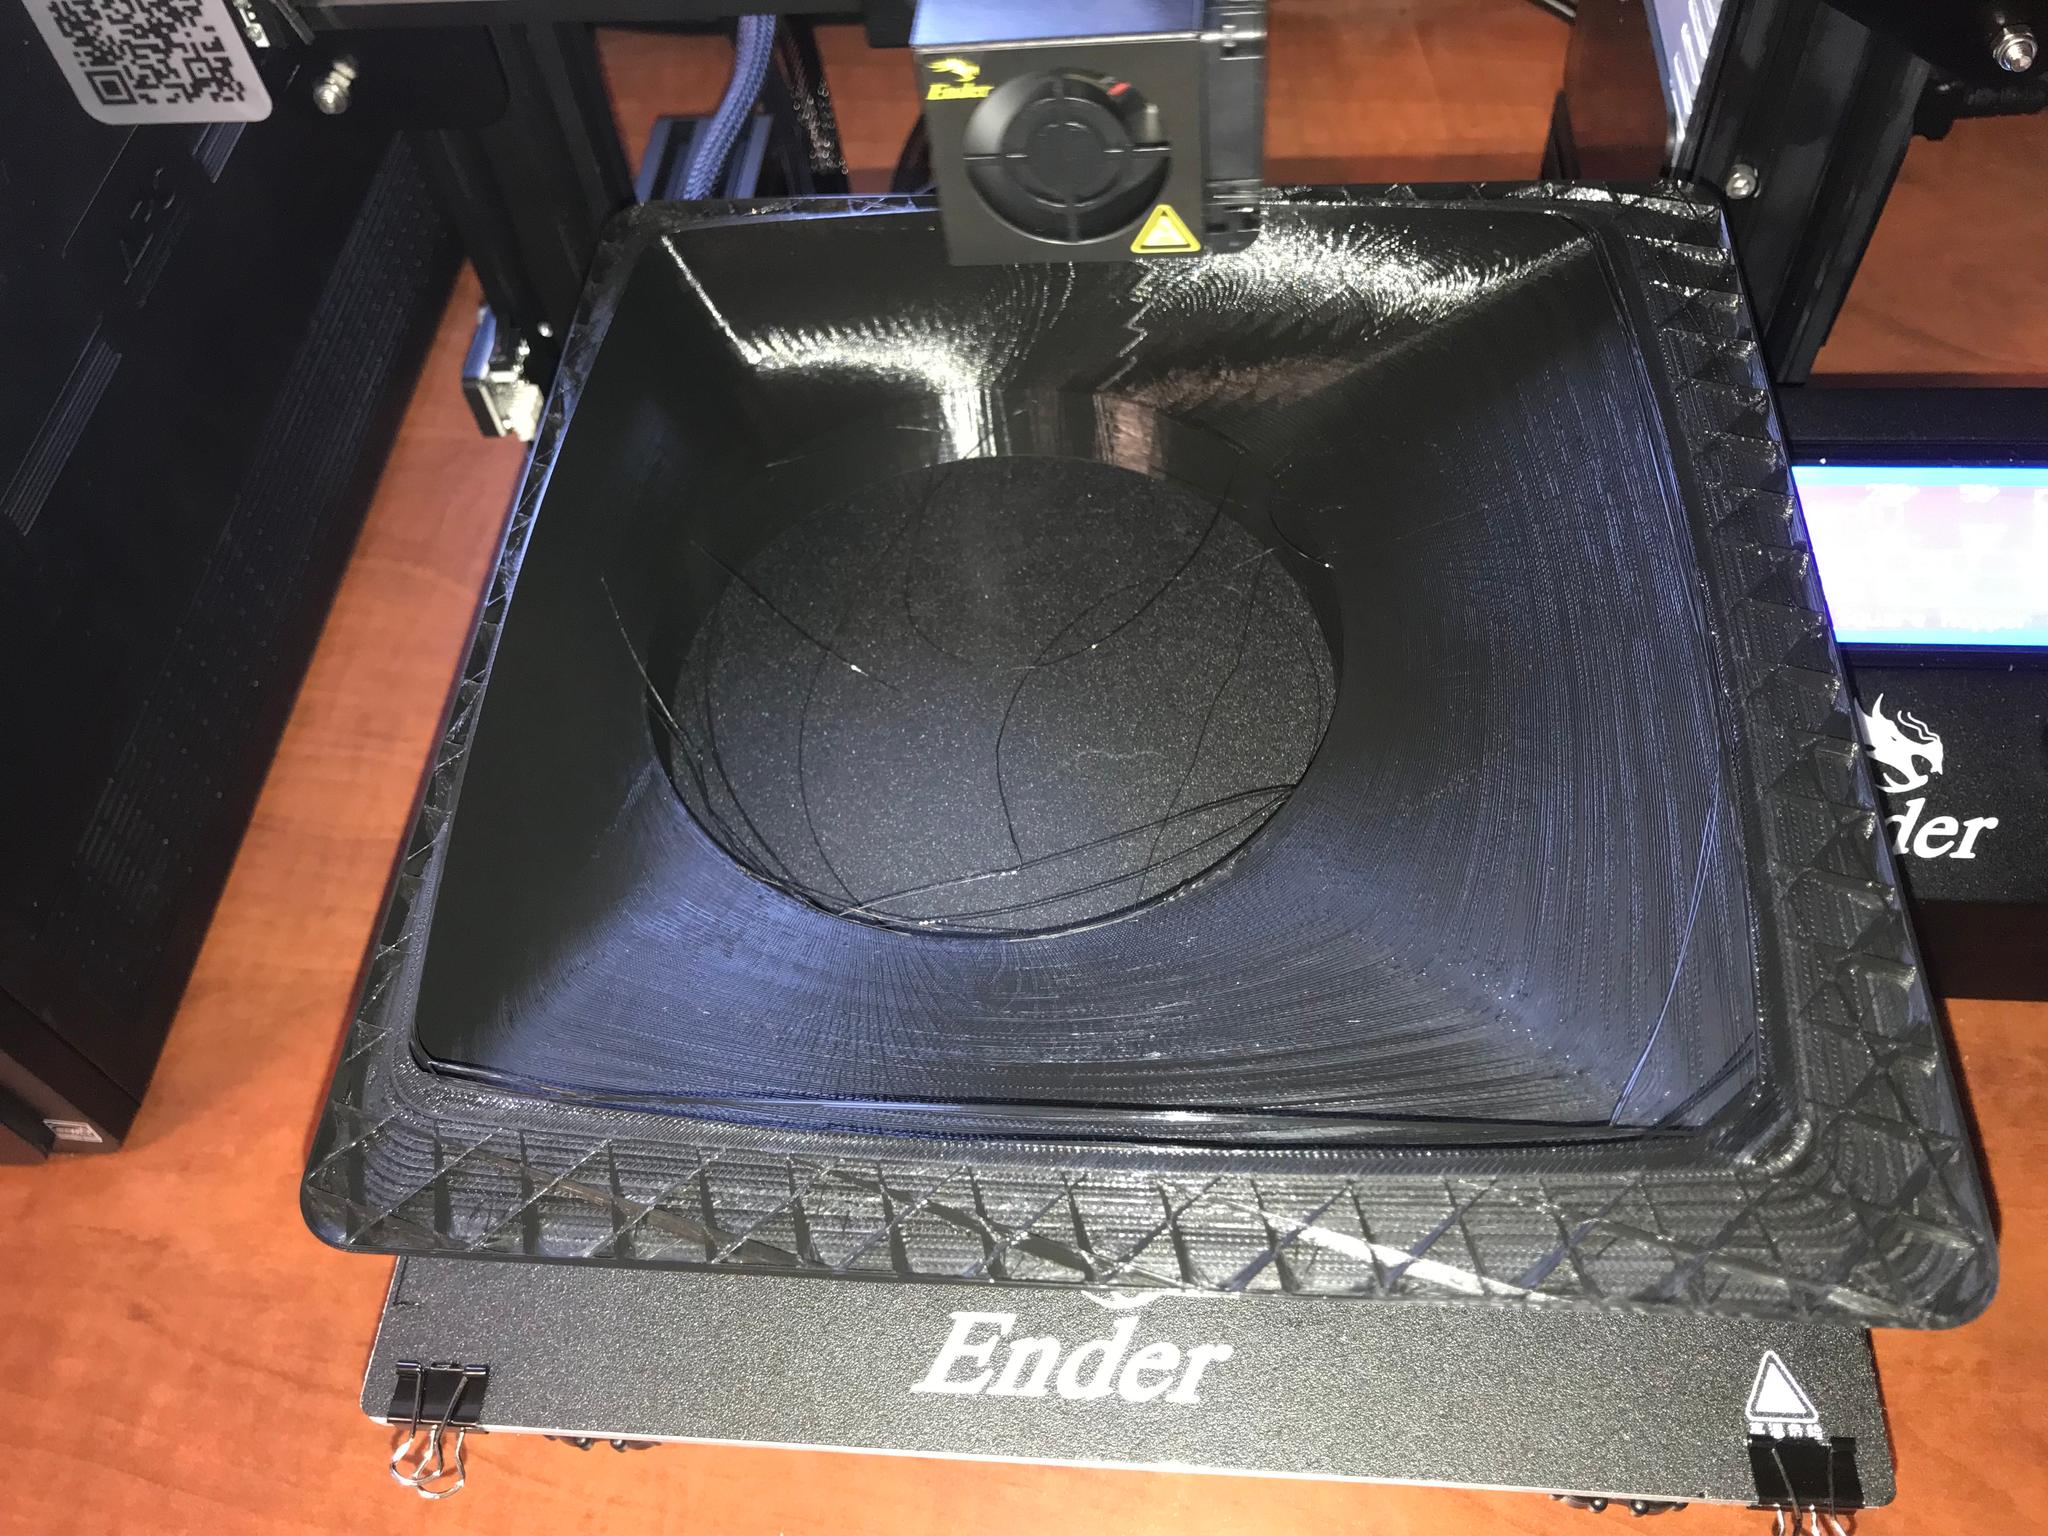 Top view of printing of funnel portion of neck.